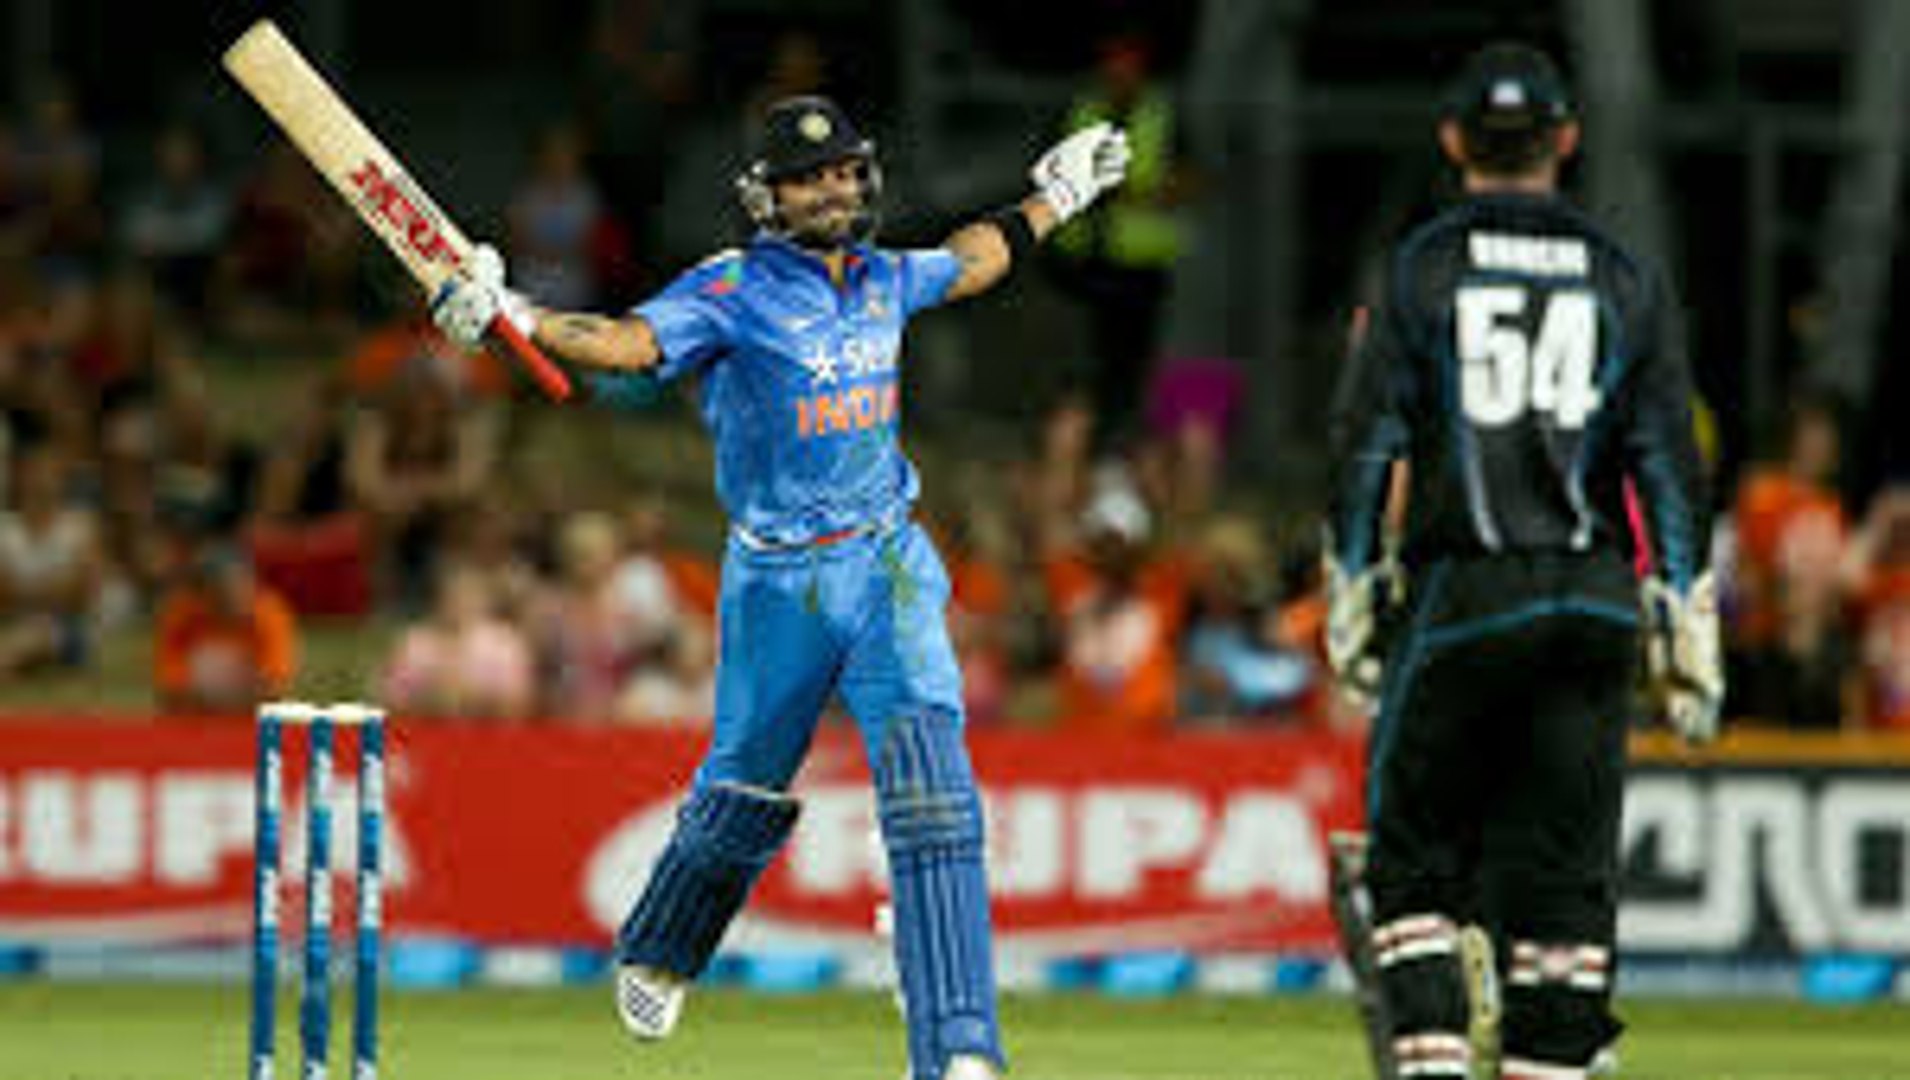 India vs New Zealand Highlights ICC Cricket World Cup 2016 - New Zealand Won by 47 runs - One of the greatest finish ever in cricket history India vs New Zealand 2016